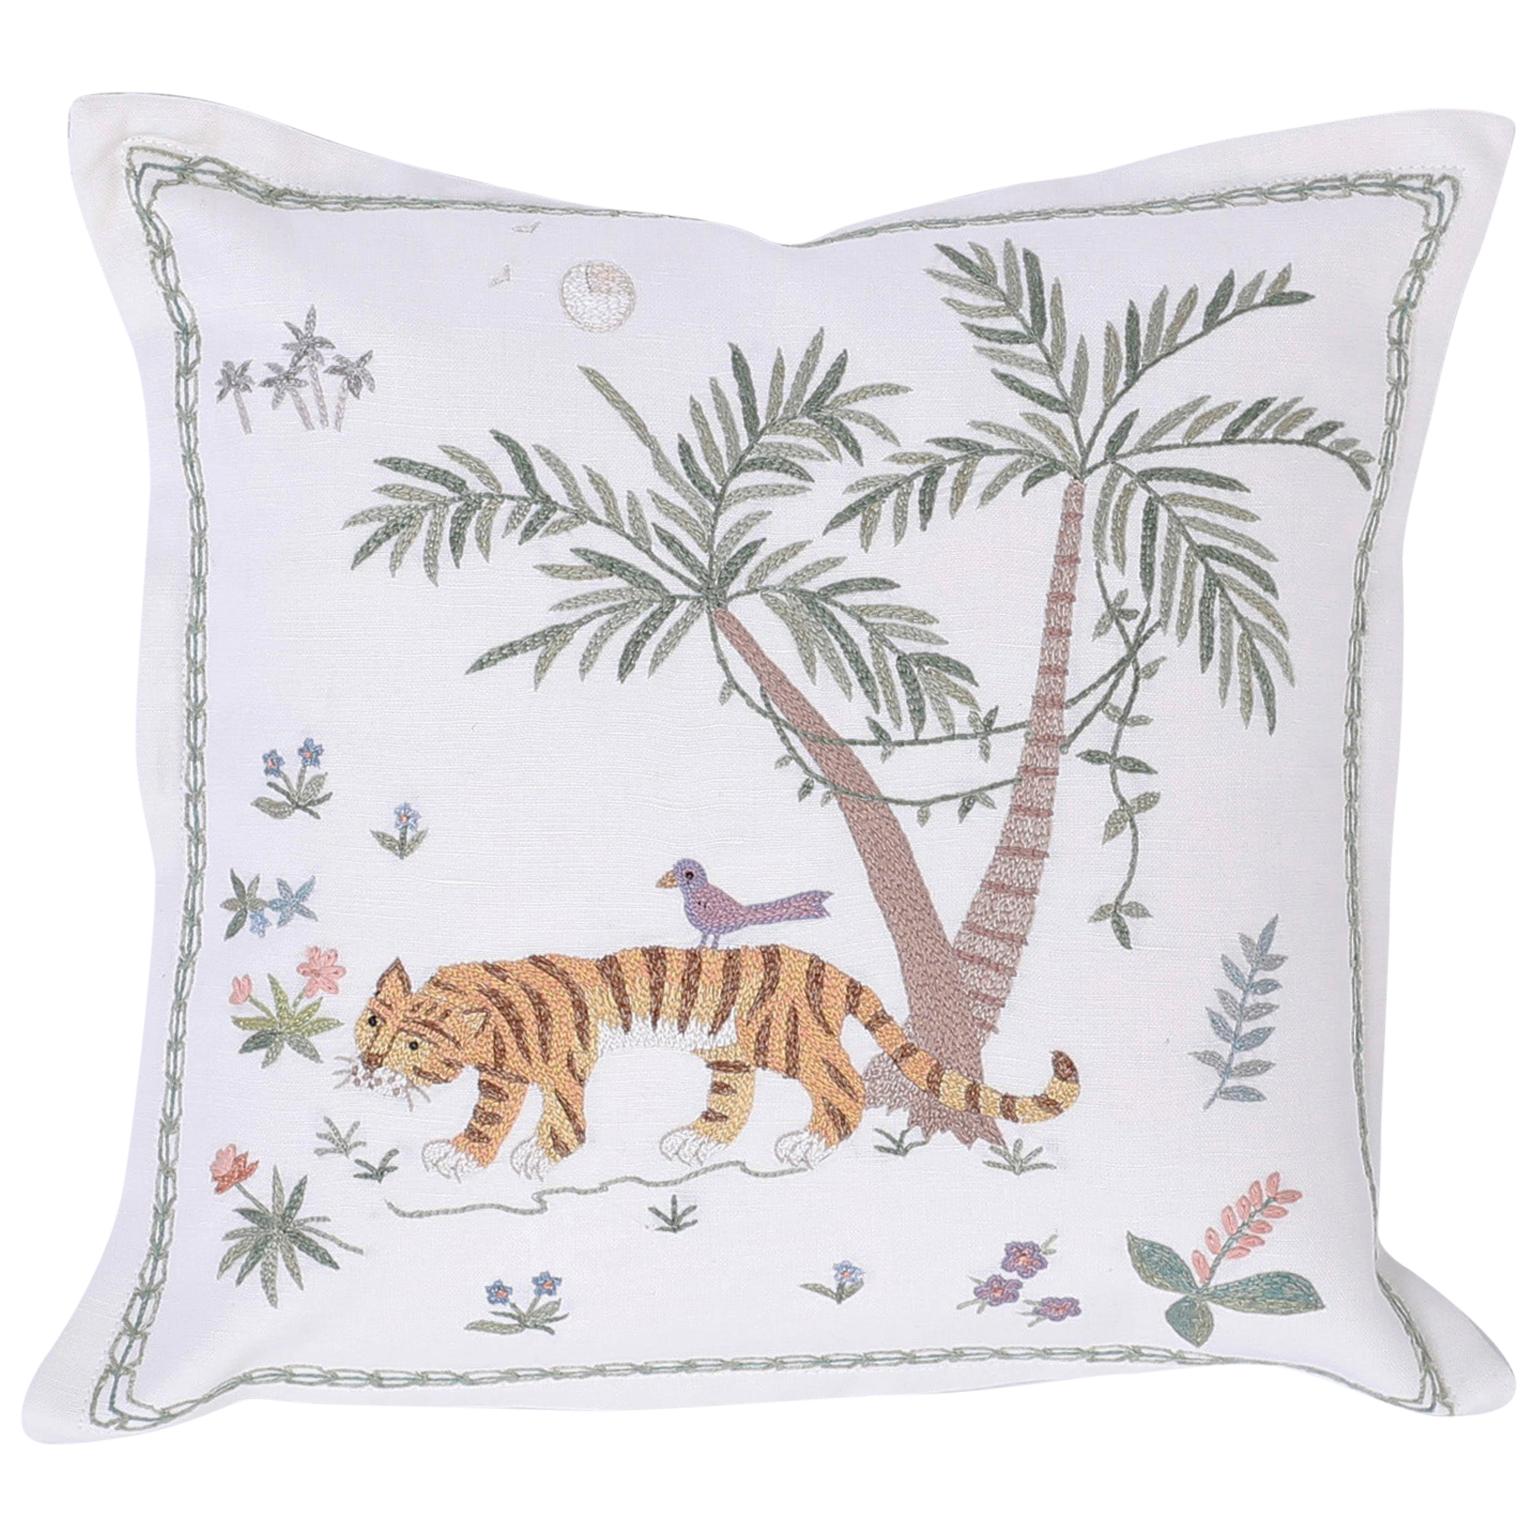 Tropical Crewelwork Tiger Pillow